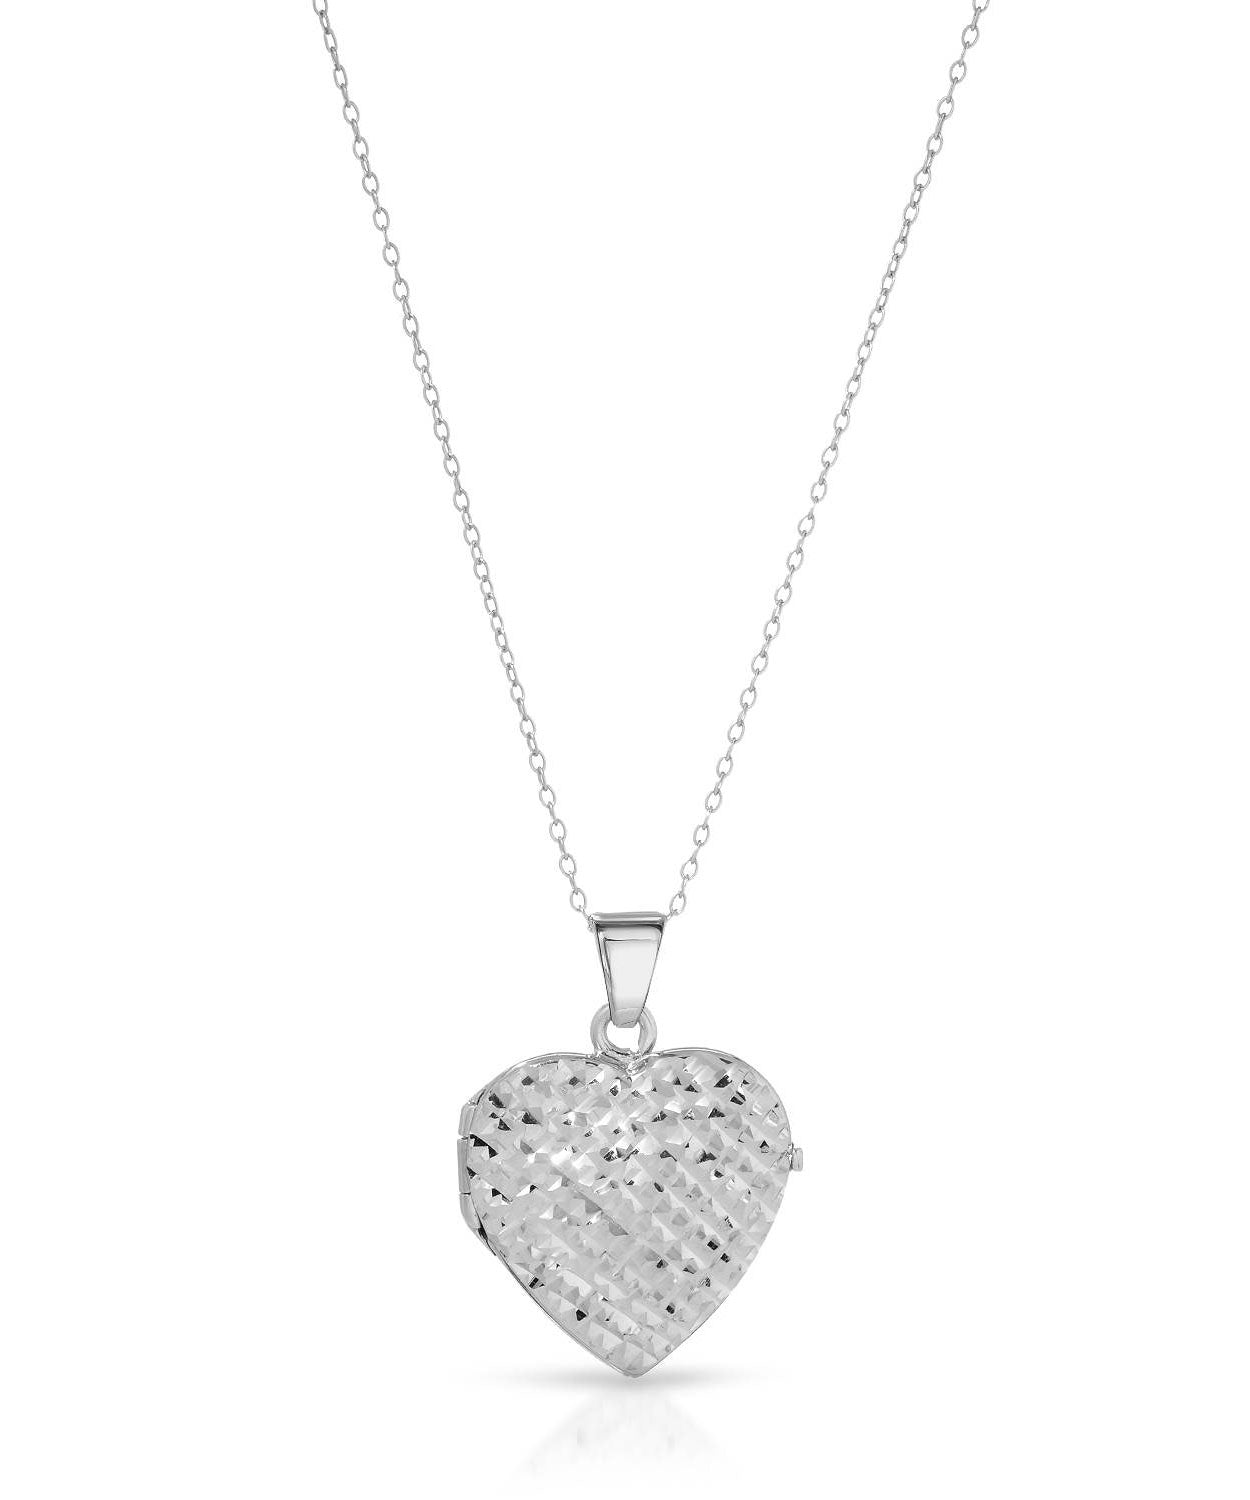 Rhodium Plated 925 Sterling Silver Heart Locket Pendant With Chain - Made in Italy View 1